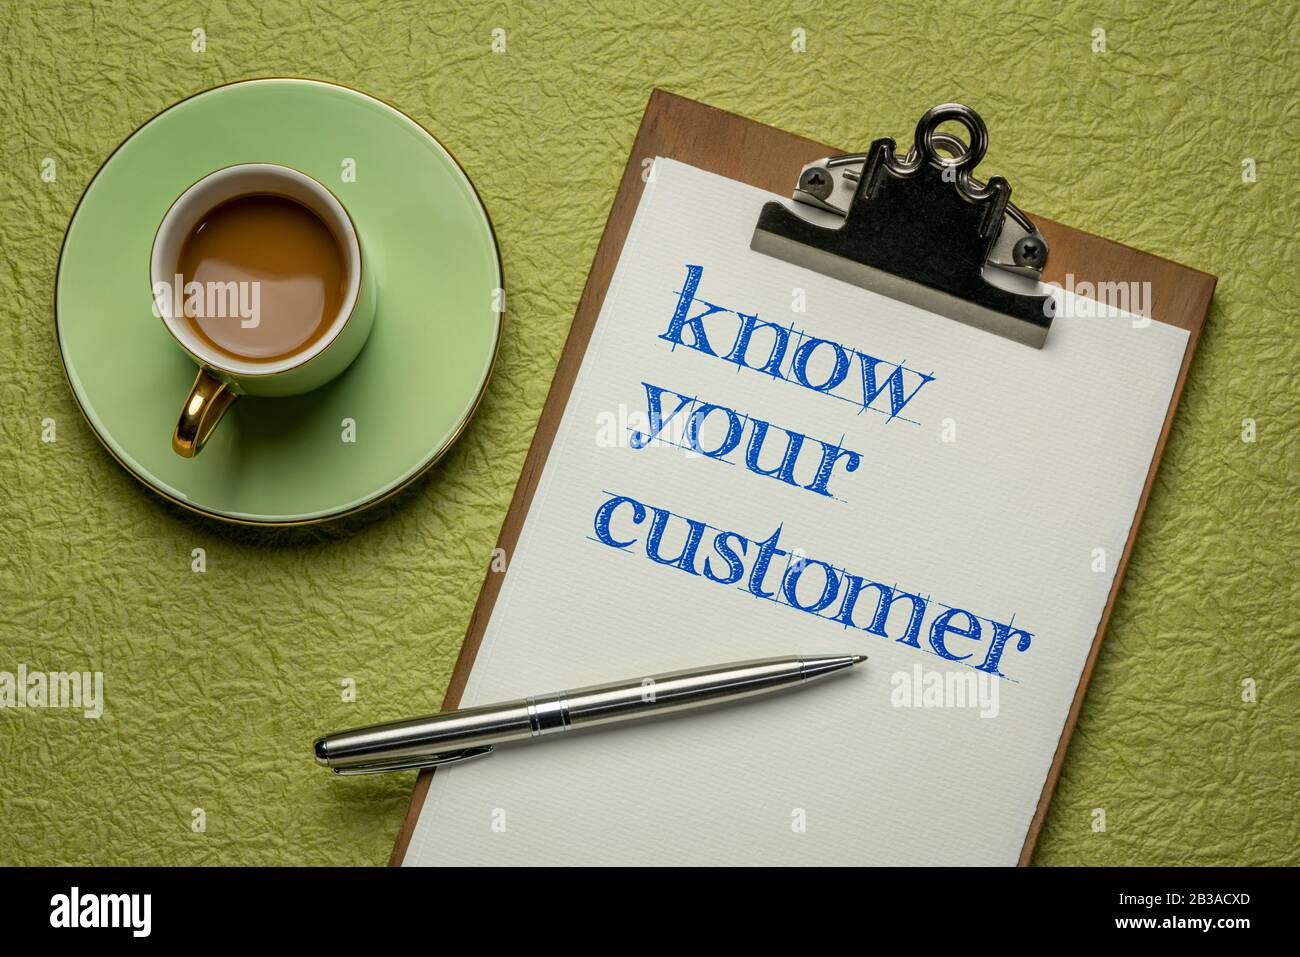 know your customer - handwriting on a clipboard with coffee, business marketing and public relations concept Stock Photo